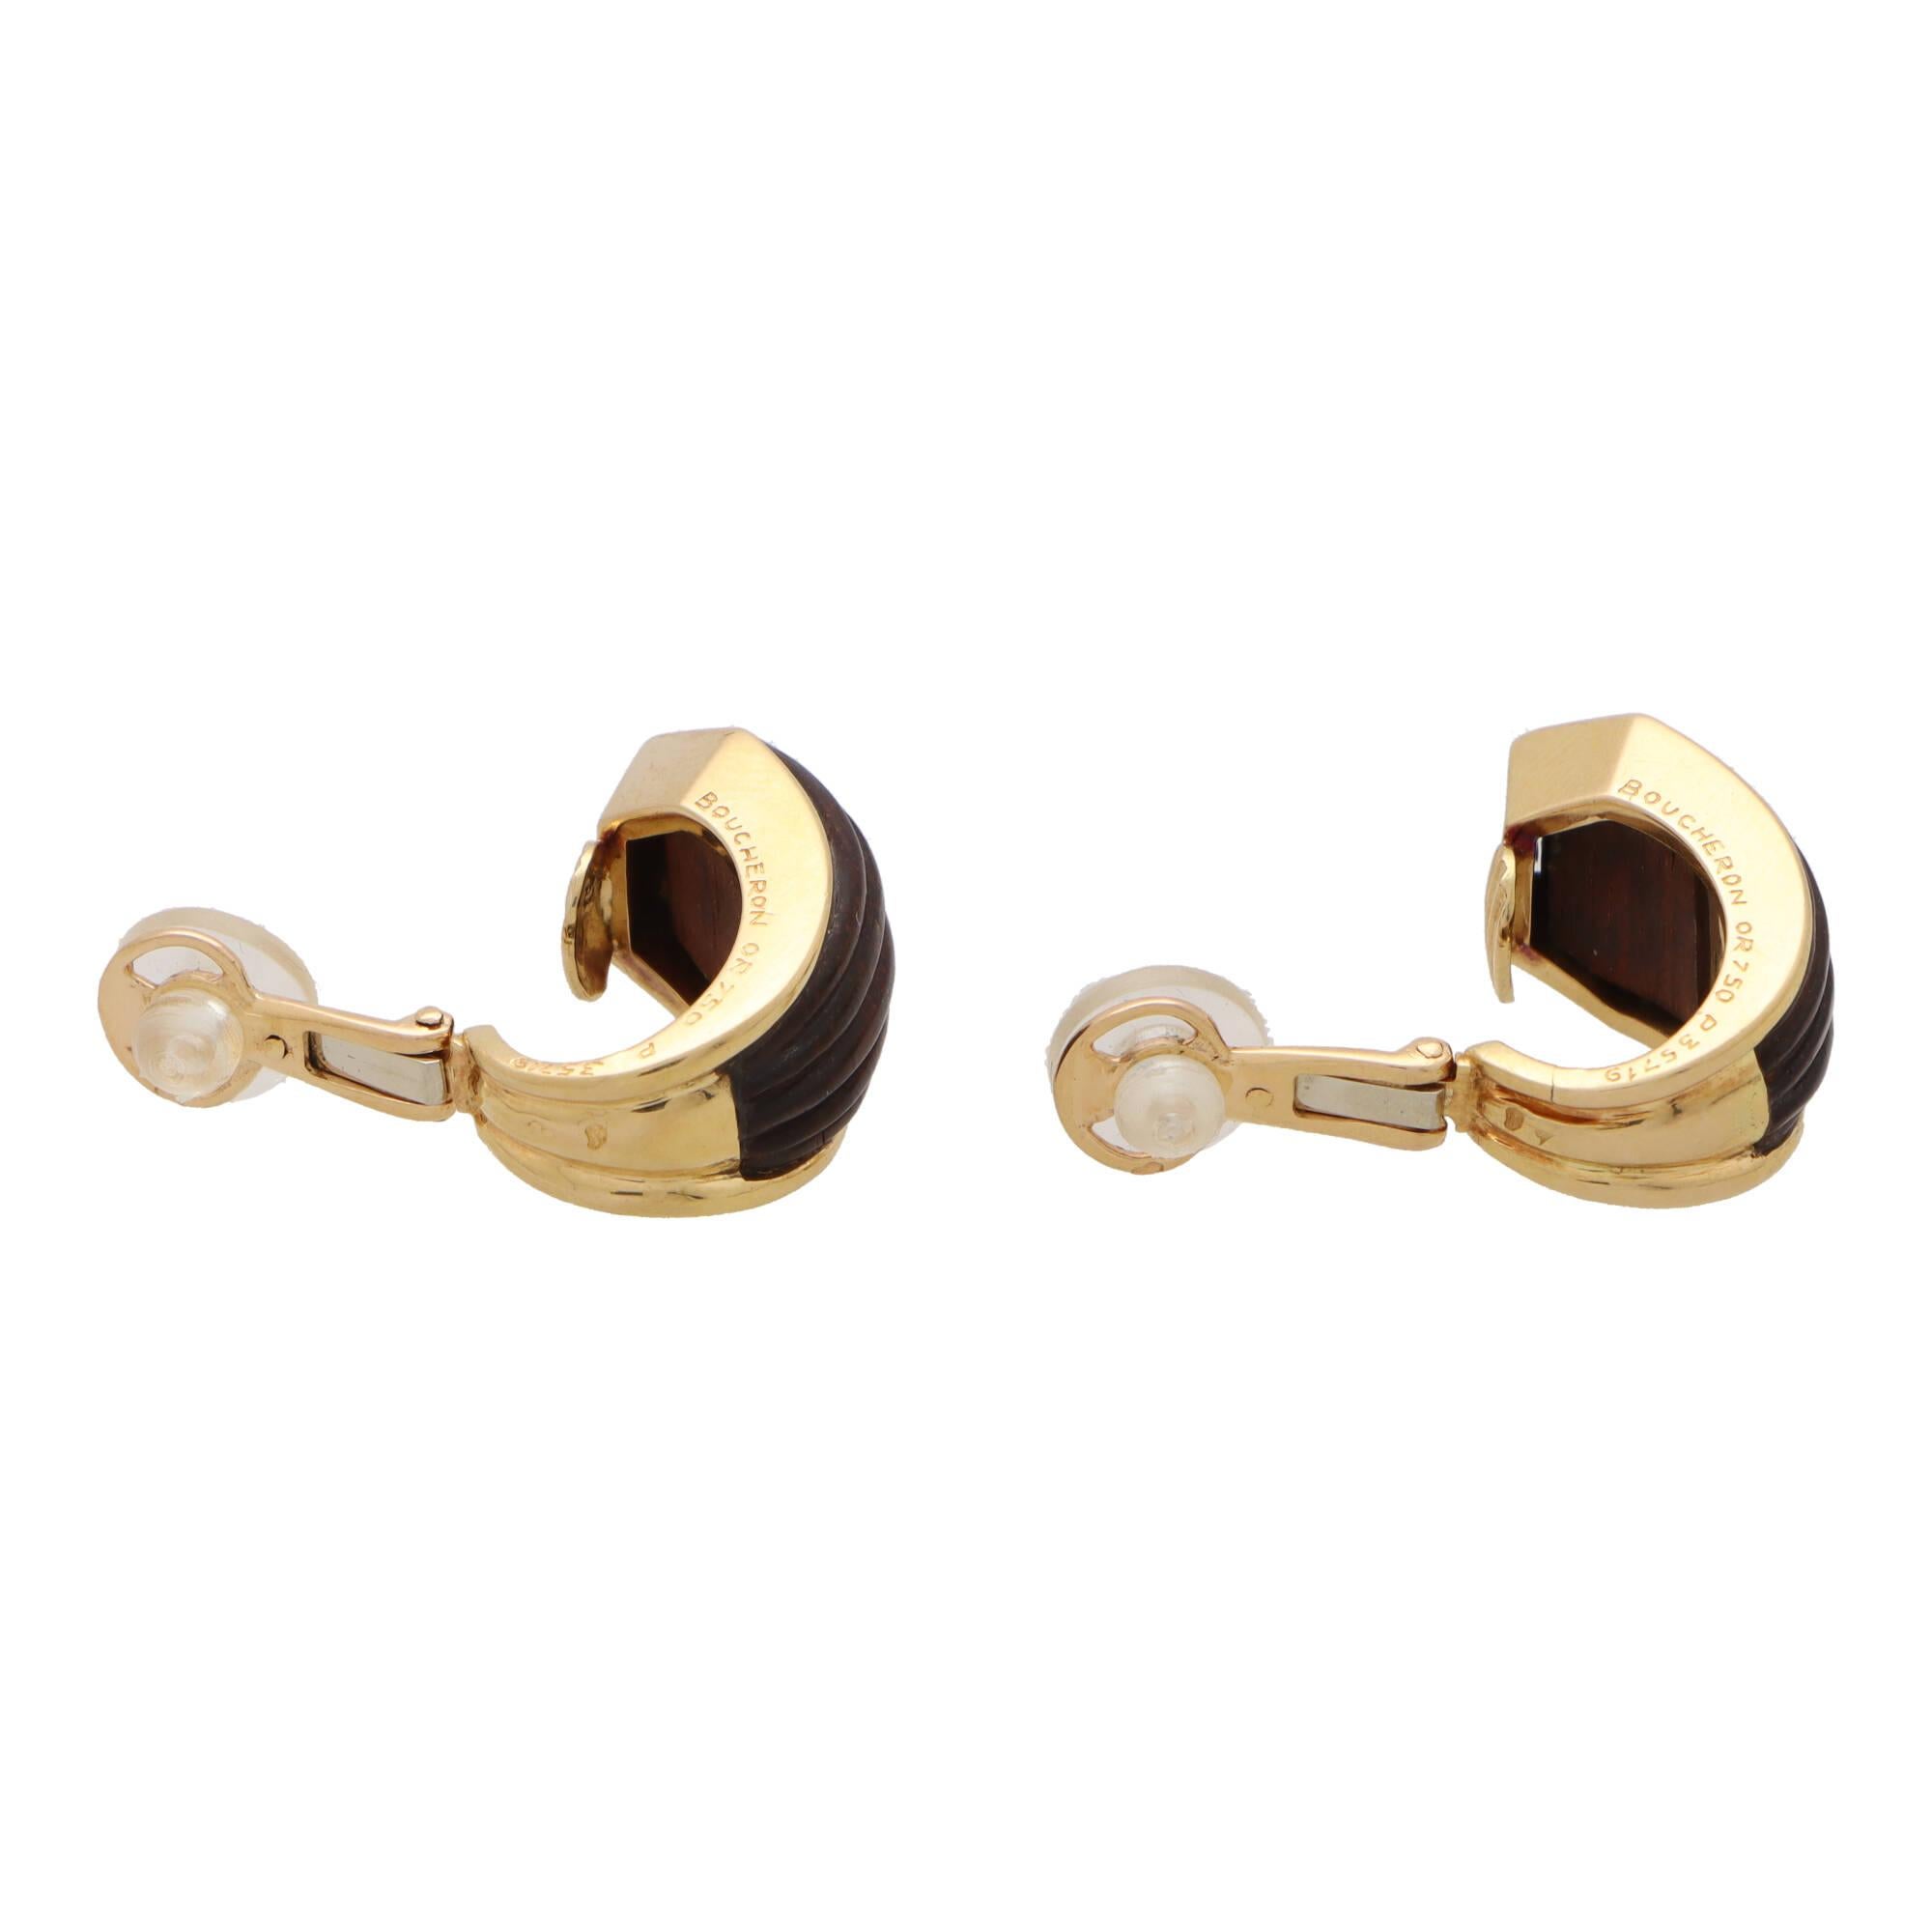 Vintage Boucheron Wood Earrings Set in 18k Yellow Gold In Excellent Condition For Sale In London, GB